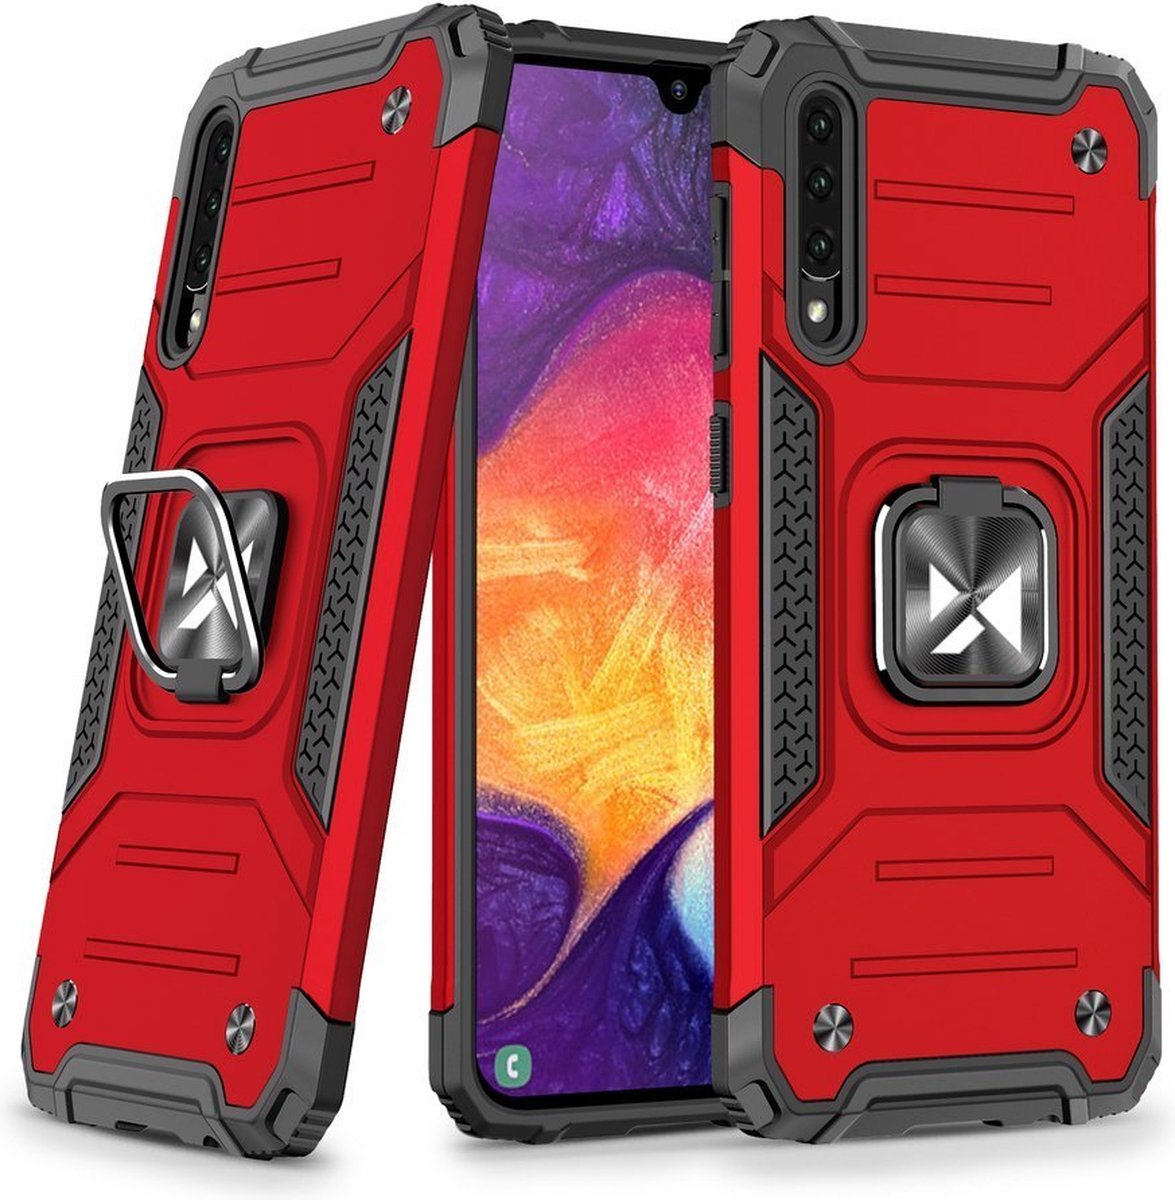 Wozinsky Ring Armor Case Kickstand Tough Rugged Cover voor Samsung Galaxy A51 rood